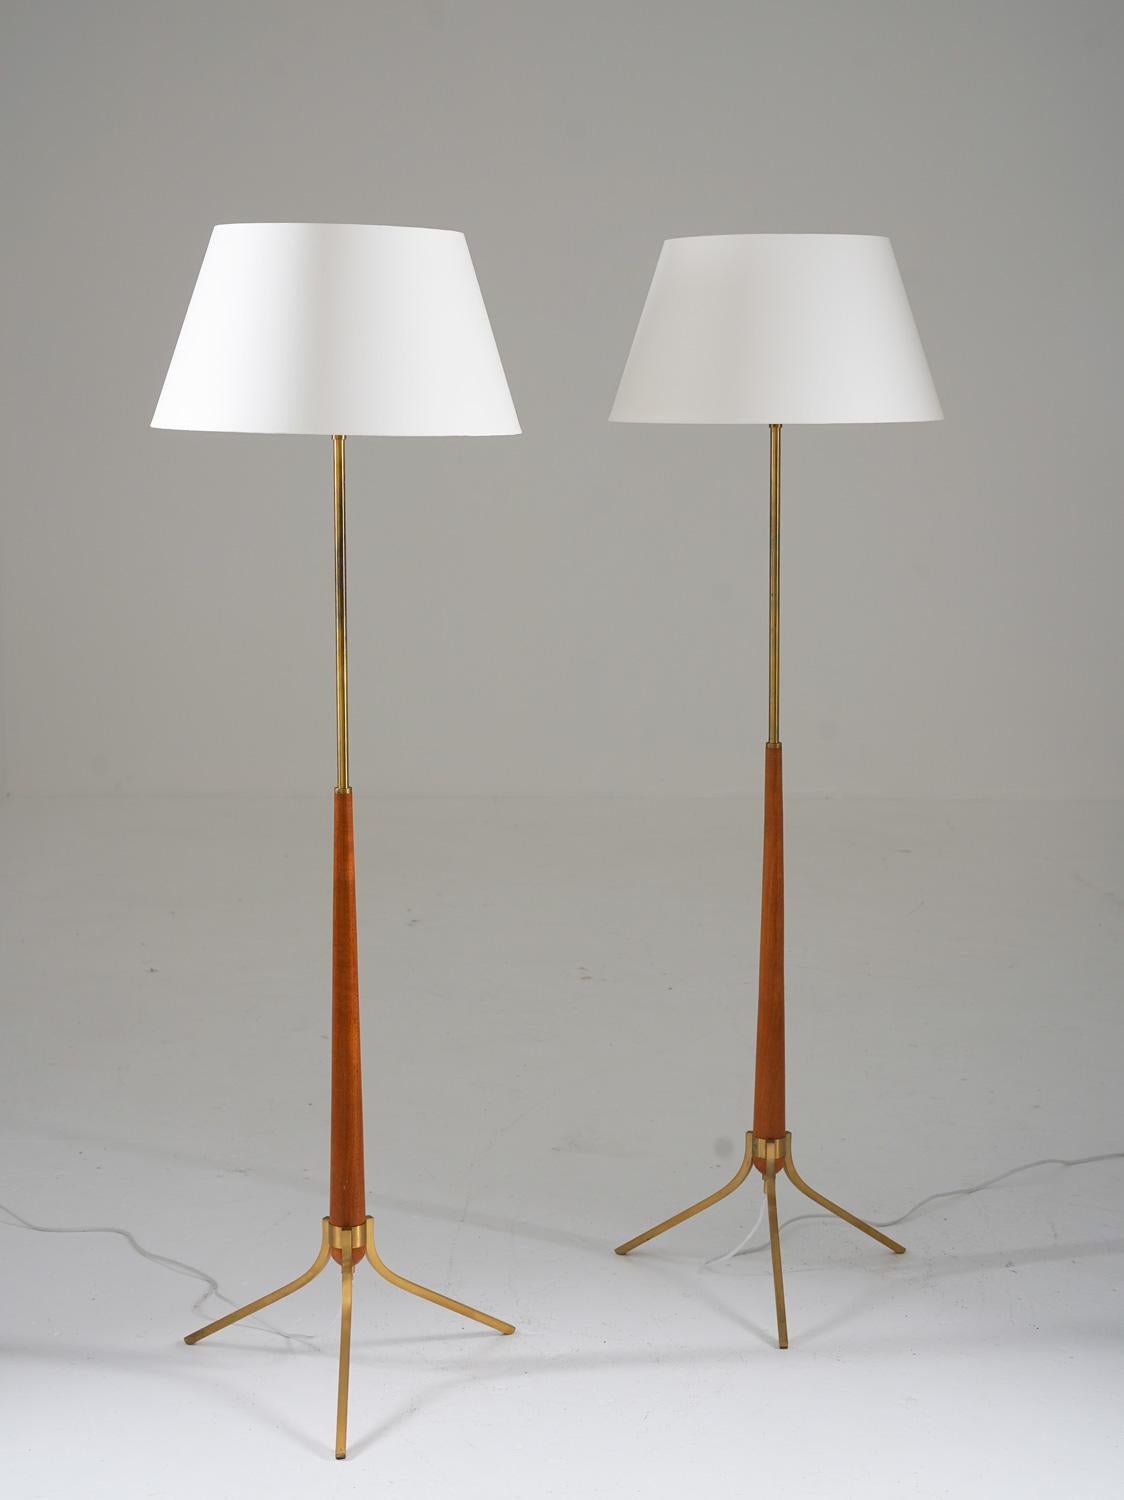 These Scandinavian mid-century tripod floor lamps are a beautiful and unique piece of design. Manufactured in Sweden in the 1950s, these lamps are made of solid brass, with details of teak. They are in very good original condition, with new